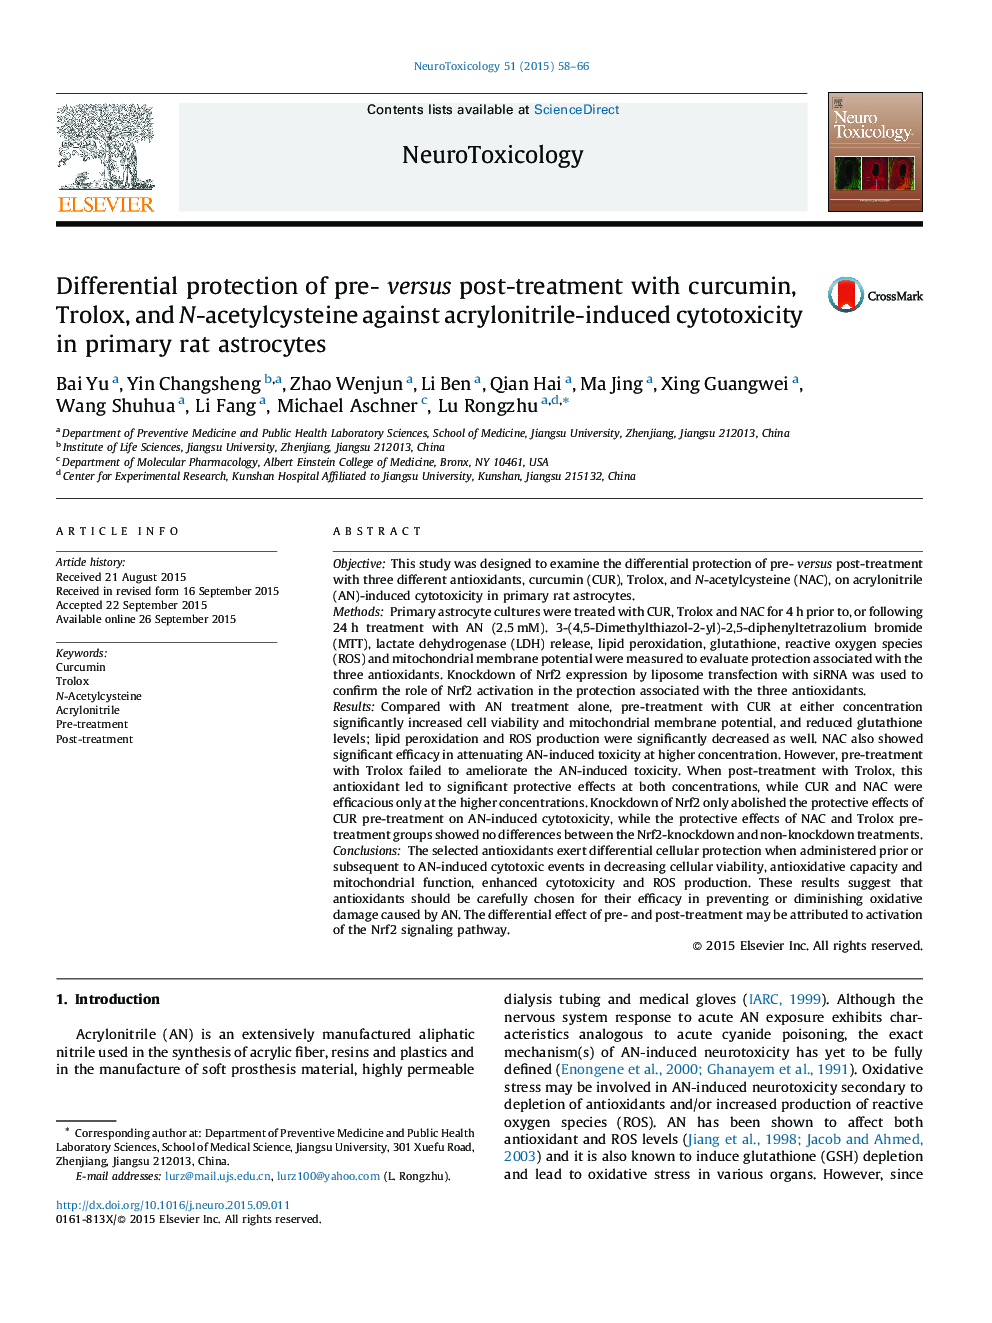 Differential protection of pre- versus post-treatment with curcumin, Trolox, and N-acetylcysteine against acrylonitrile-induced cytotoxicity in primary rat astrocytes